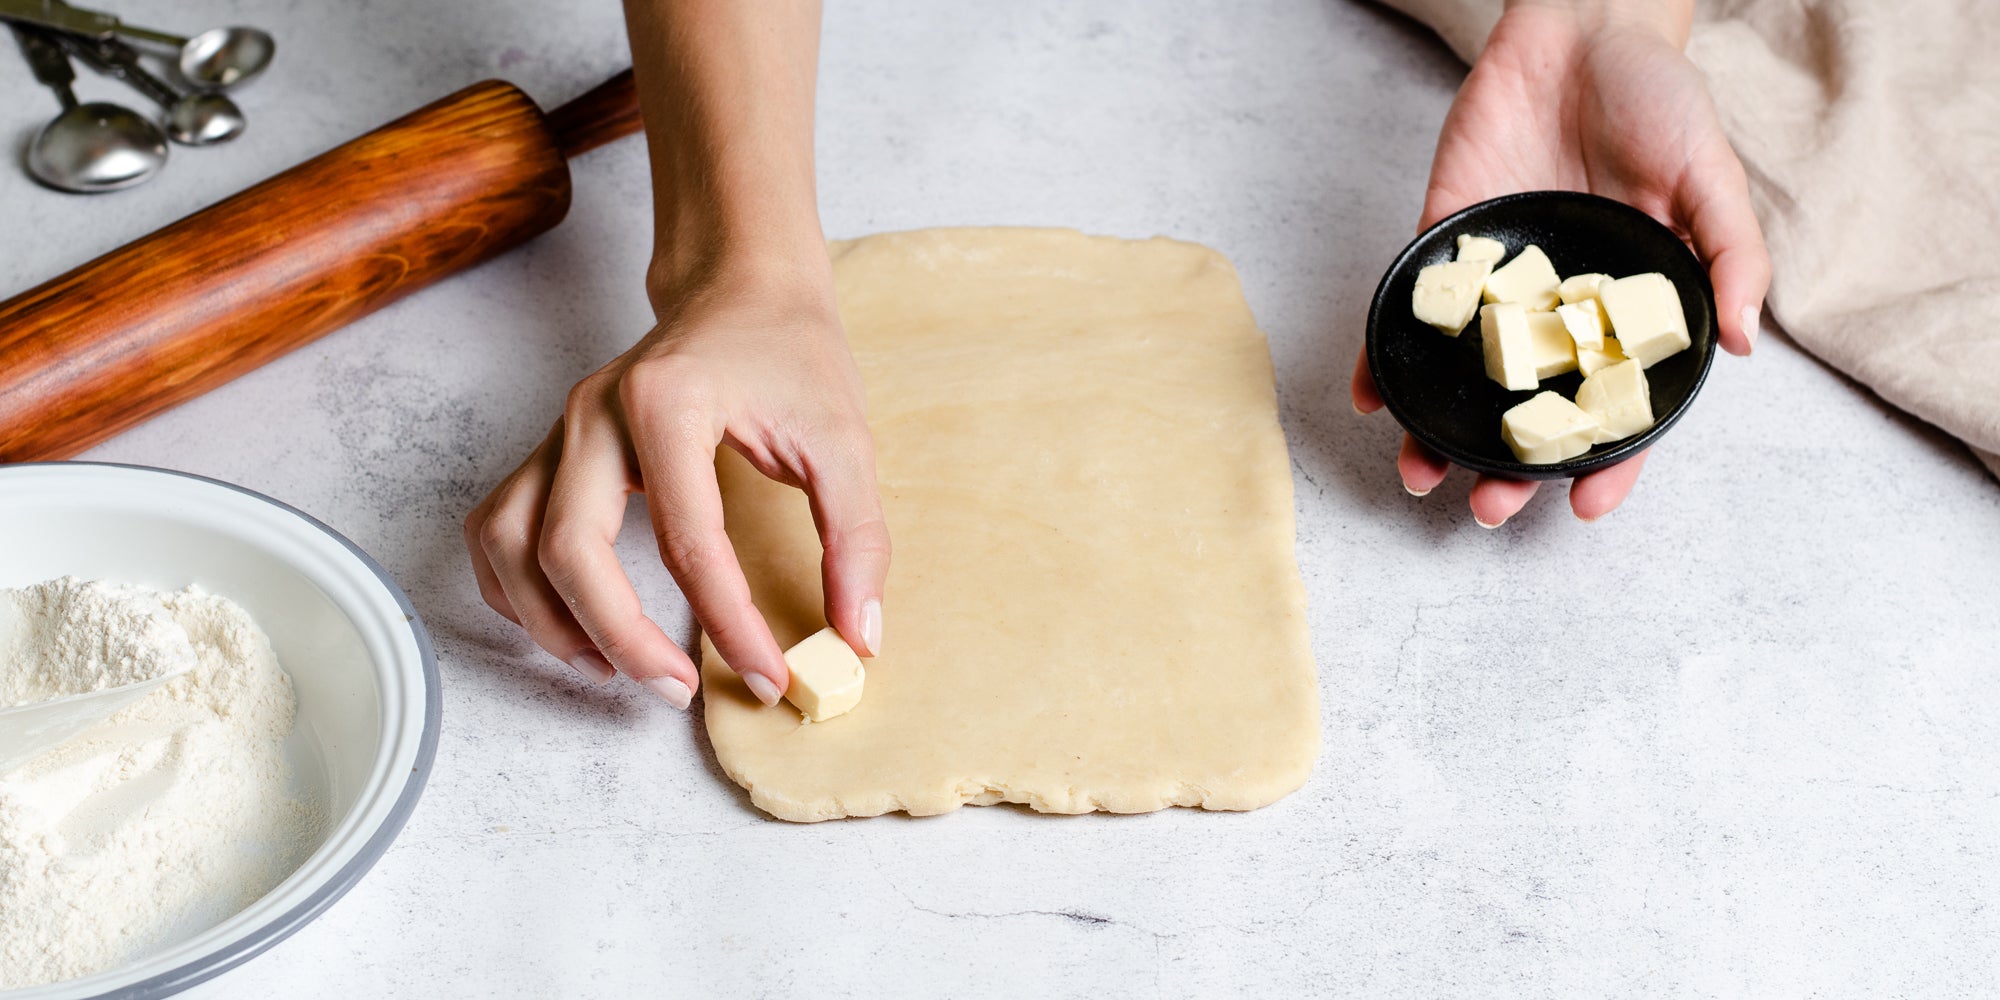 Hand laying out pieces of butter on rolled out Puff Pastry dough, ready to fold and roll out, next to a rolling pin and bowl of flour